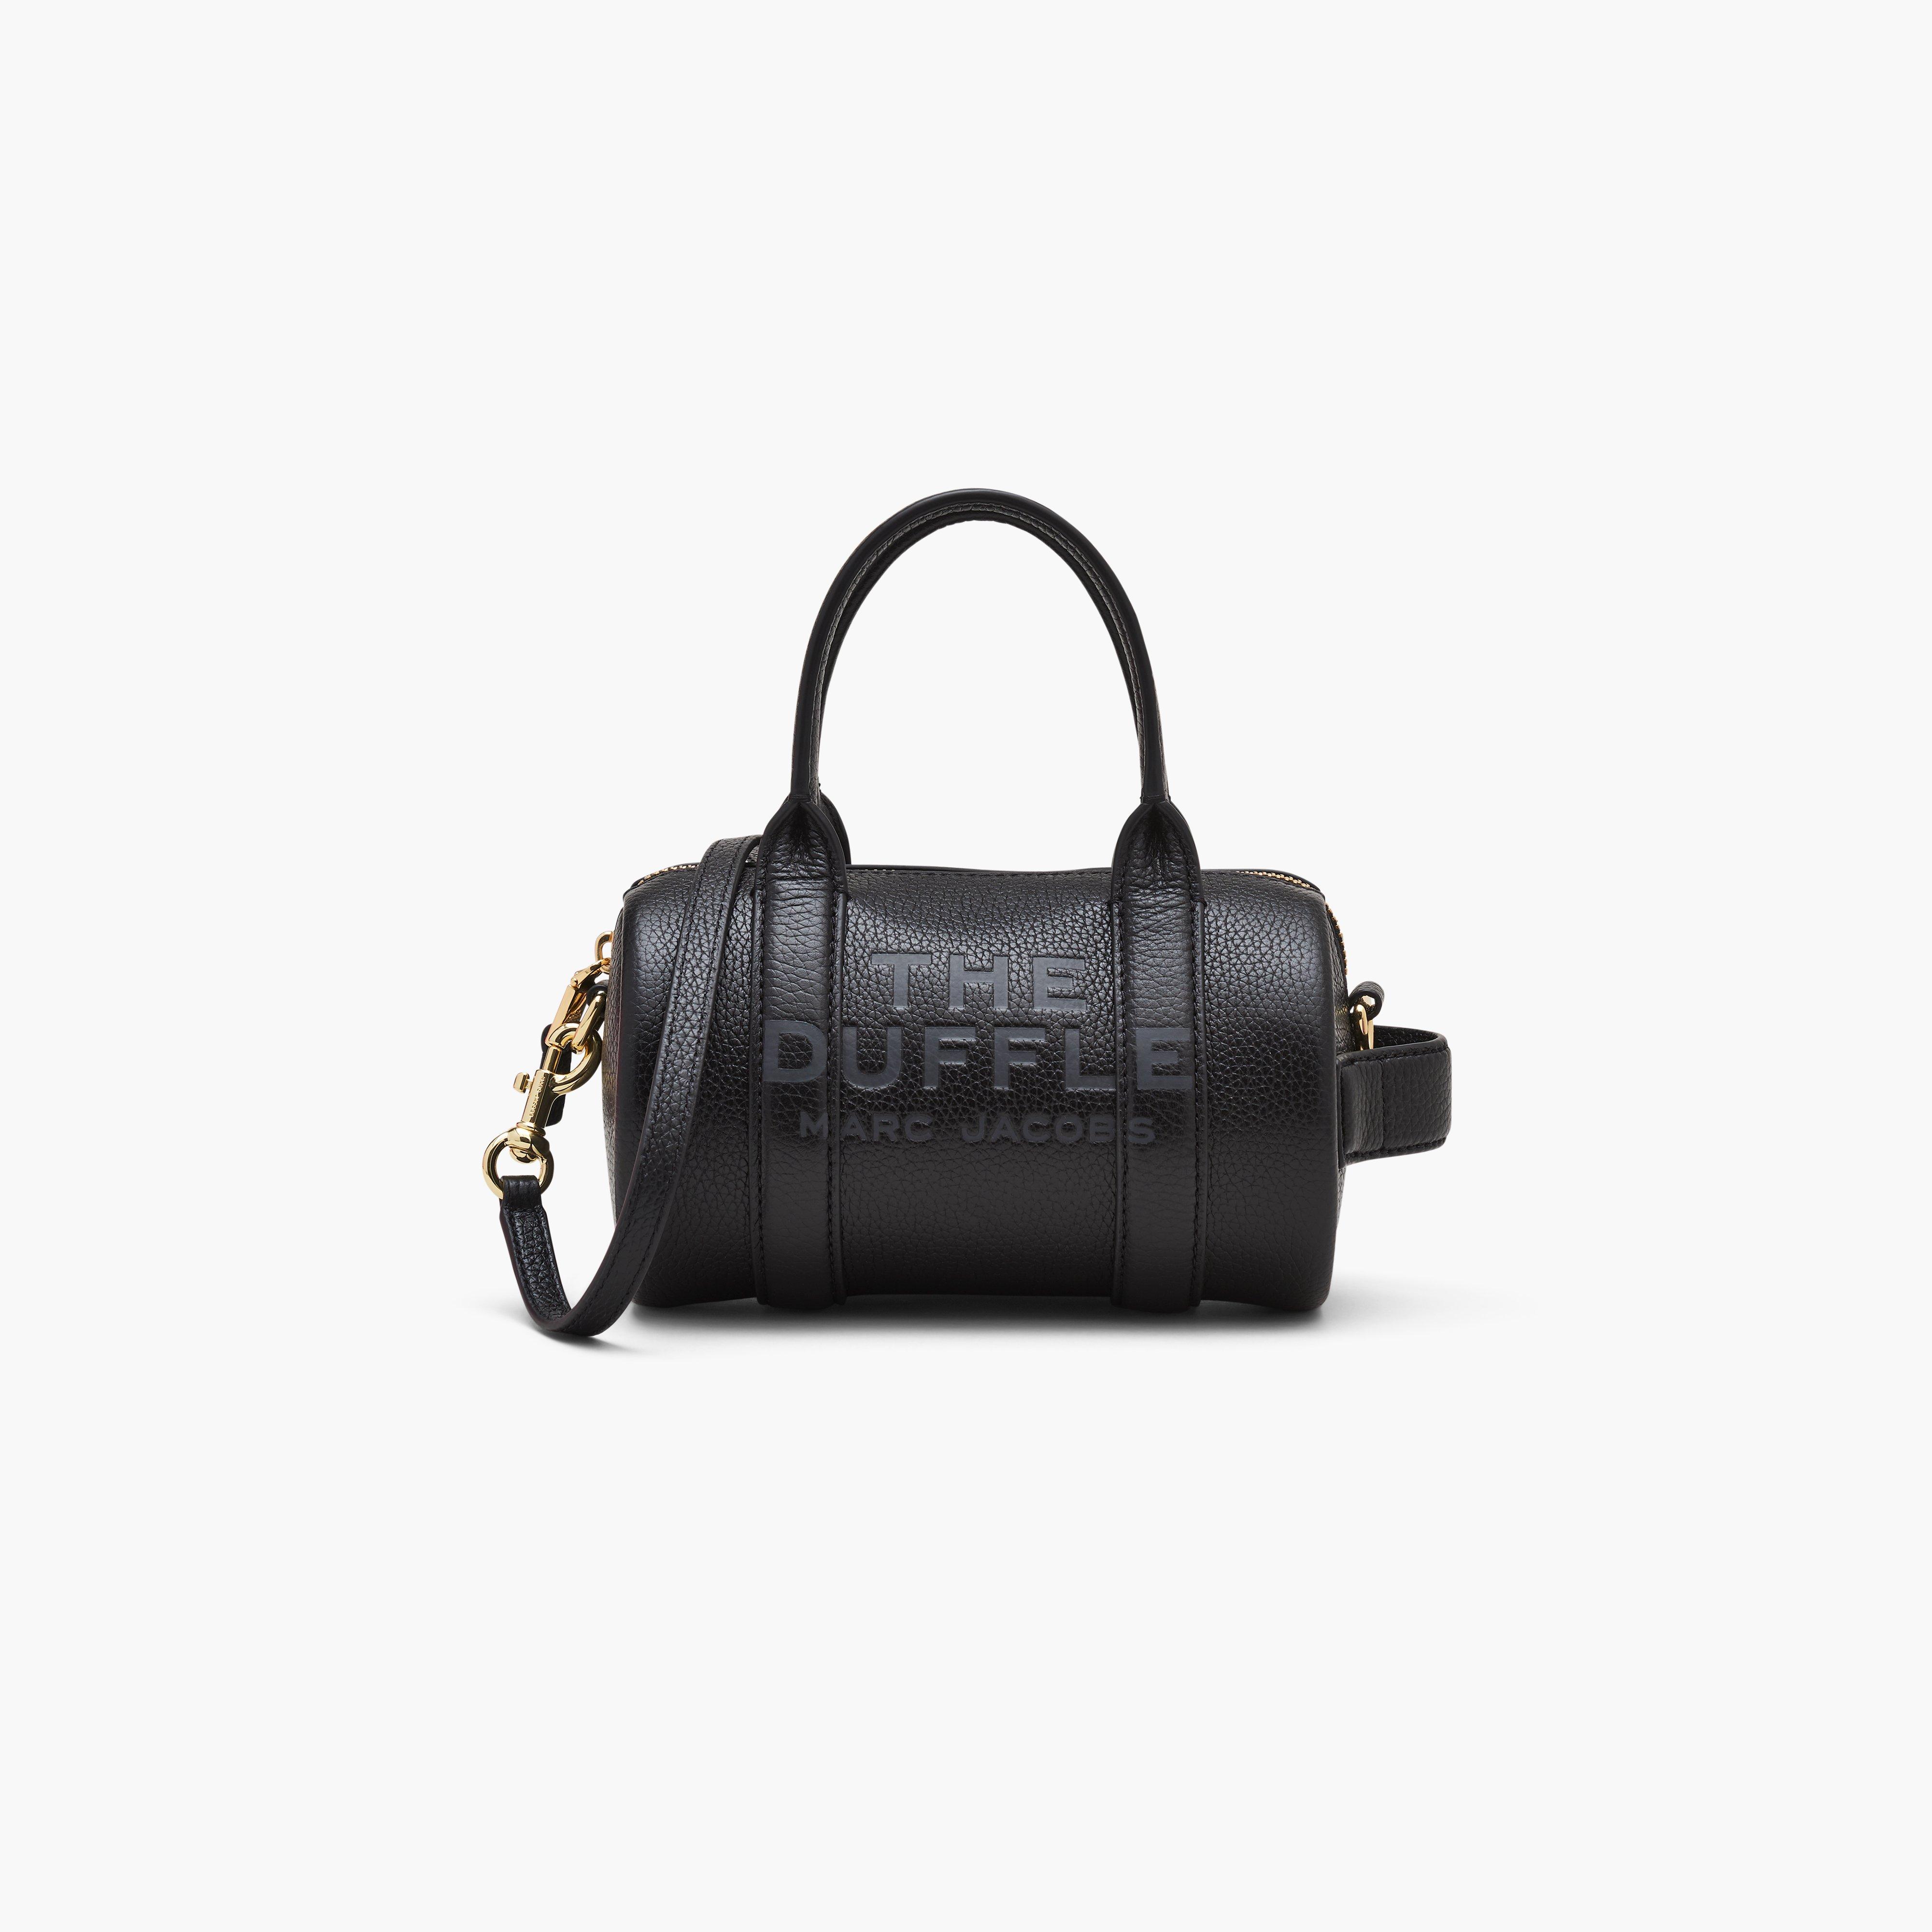 Marc by Marc jacobs The Leather Mini Duffle Bag,BLACK